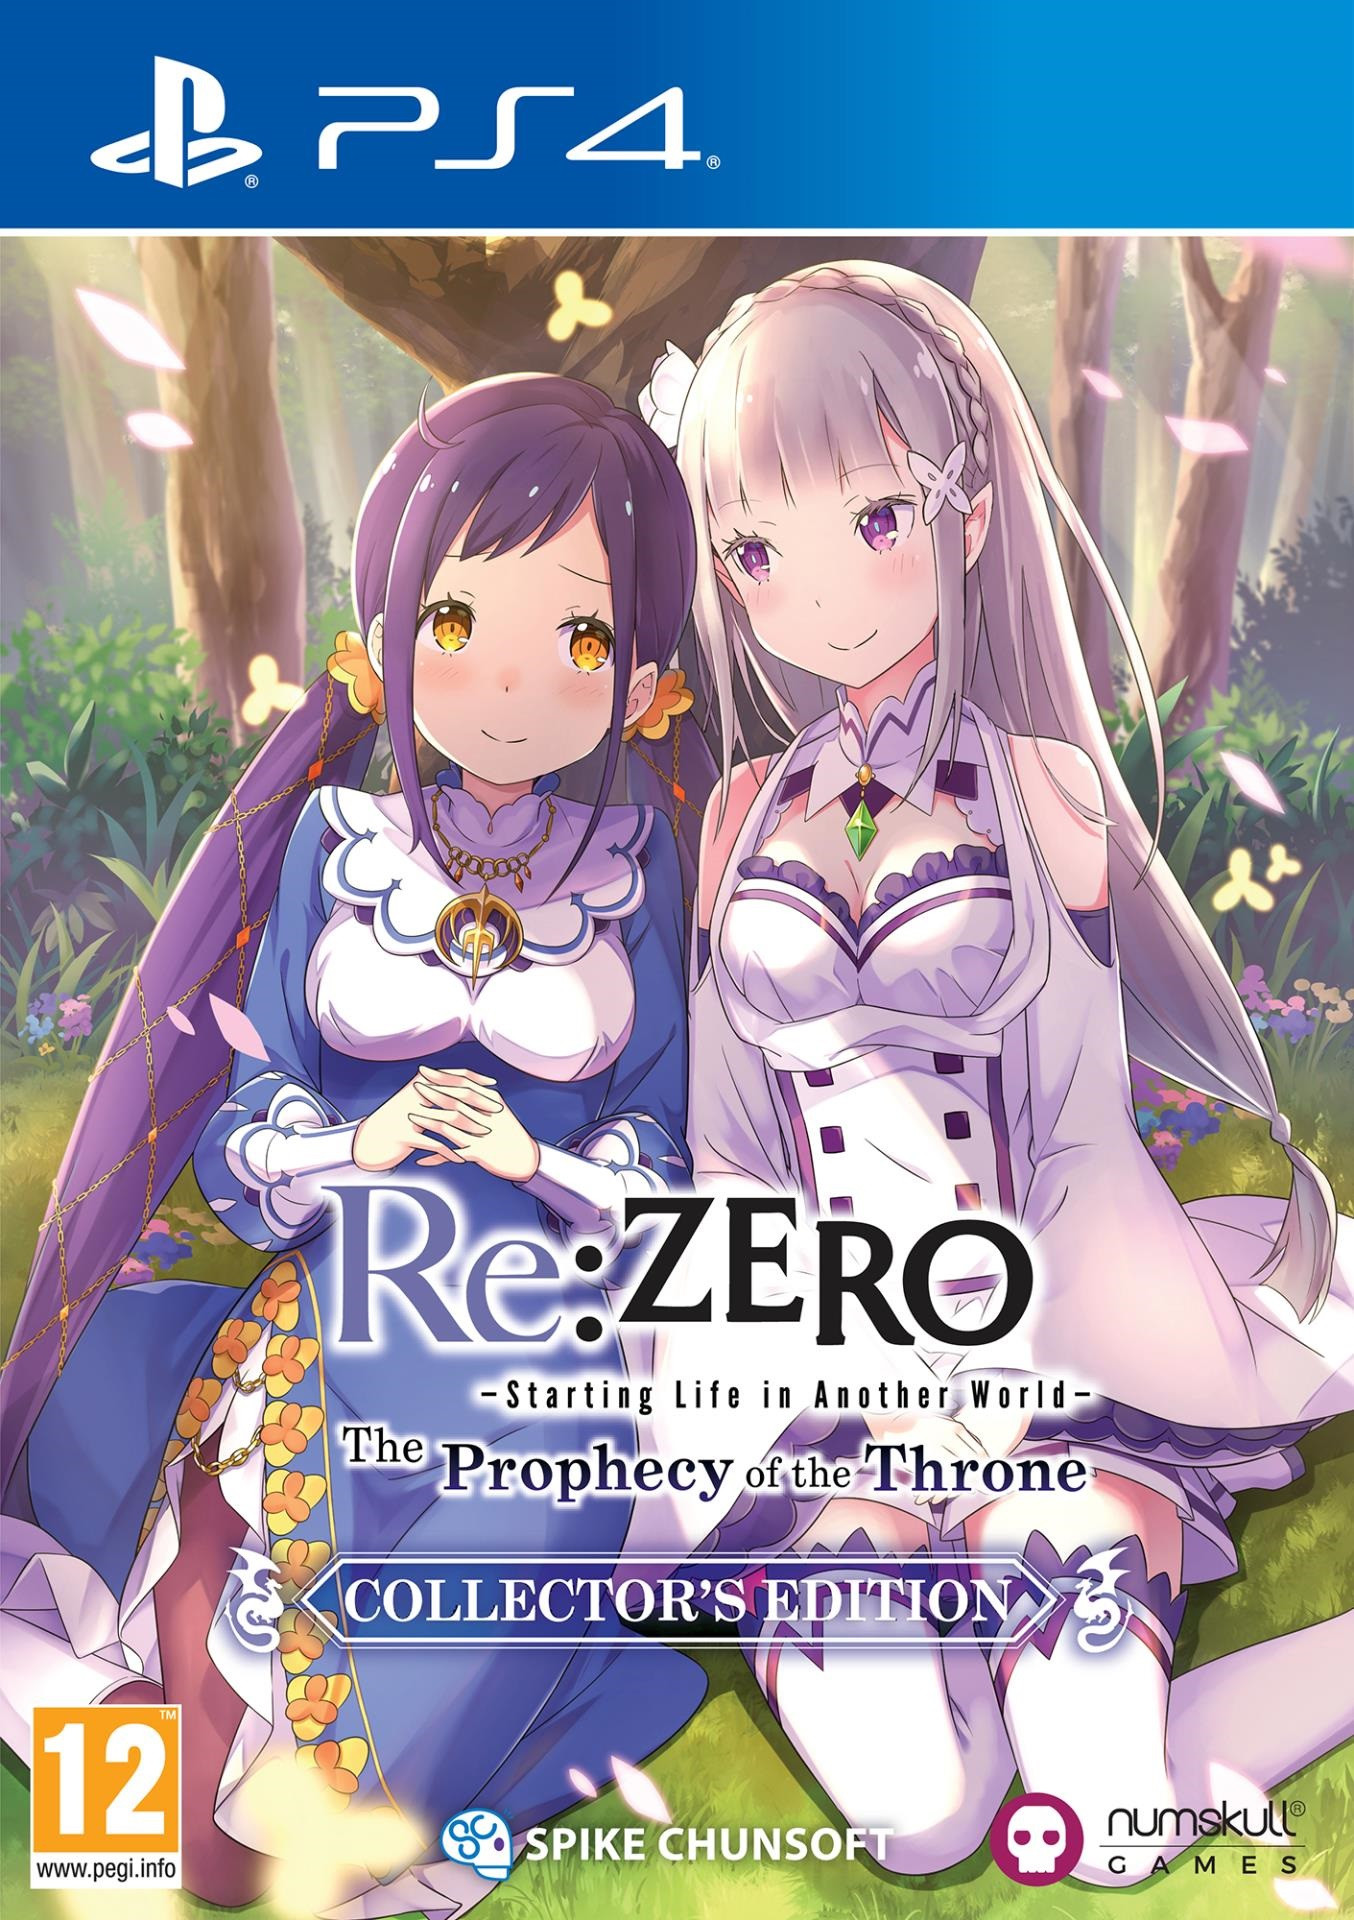 Re:ZERO Starting Life in Another World: The Prophecy of the Throne Collector's Edition